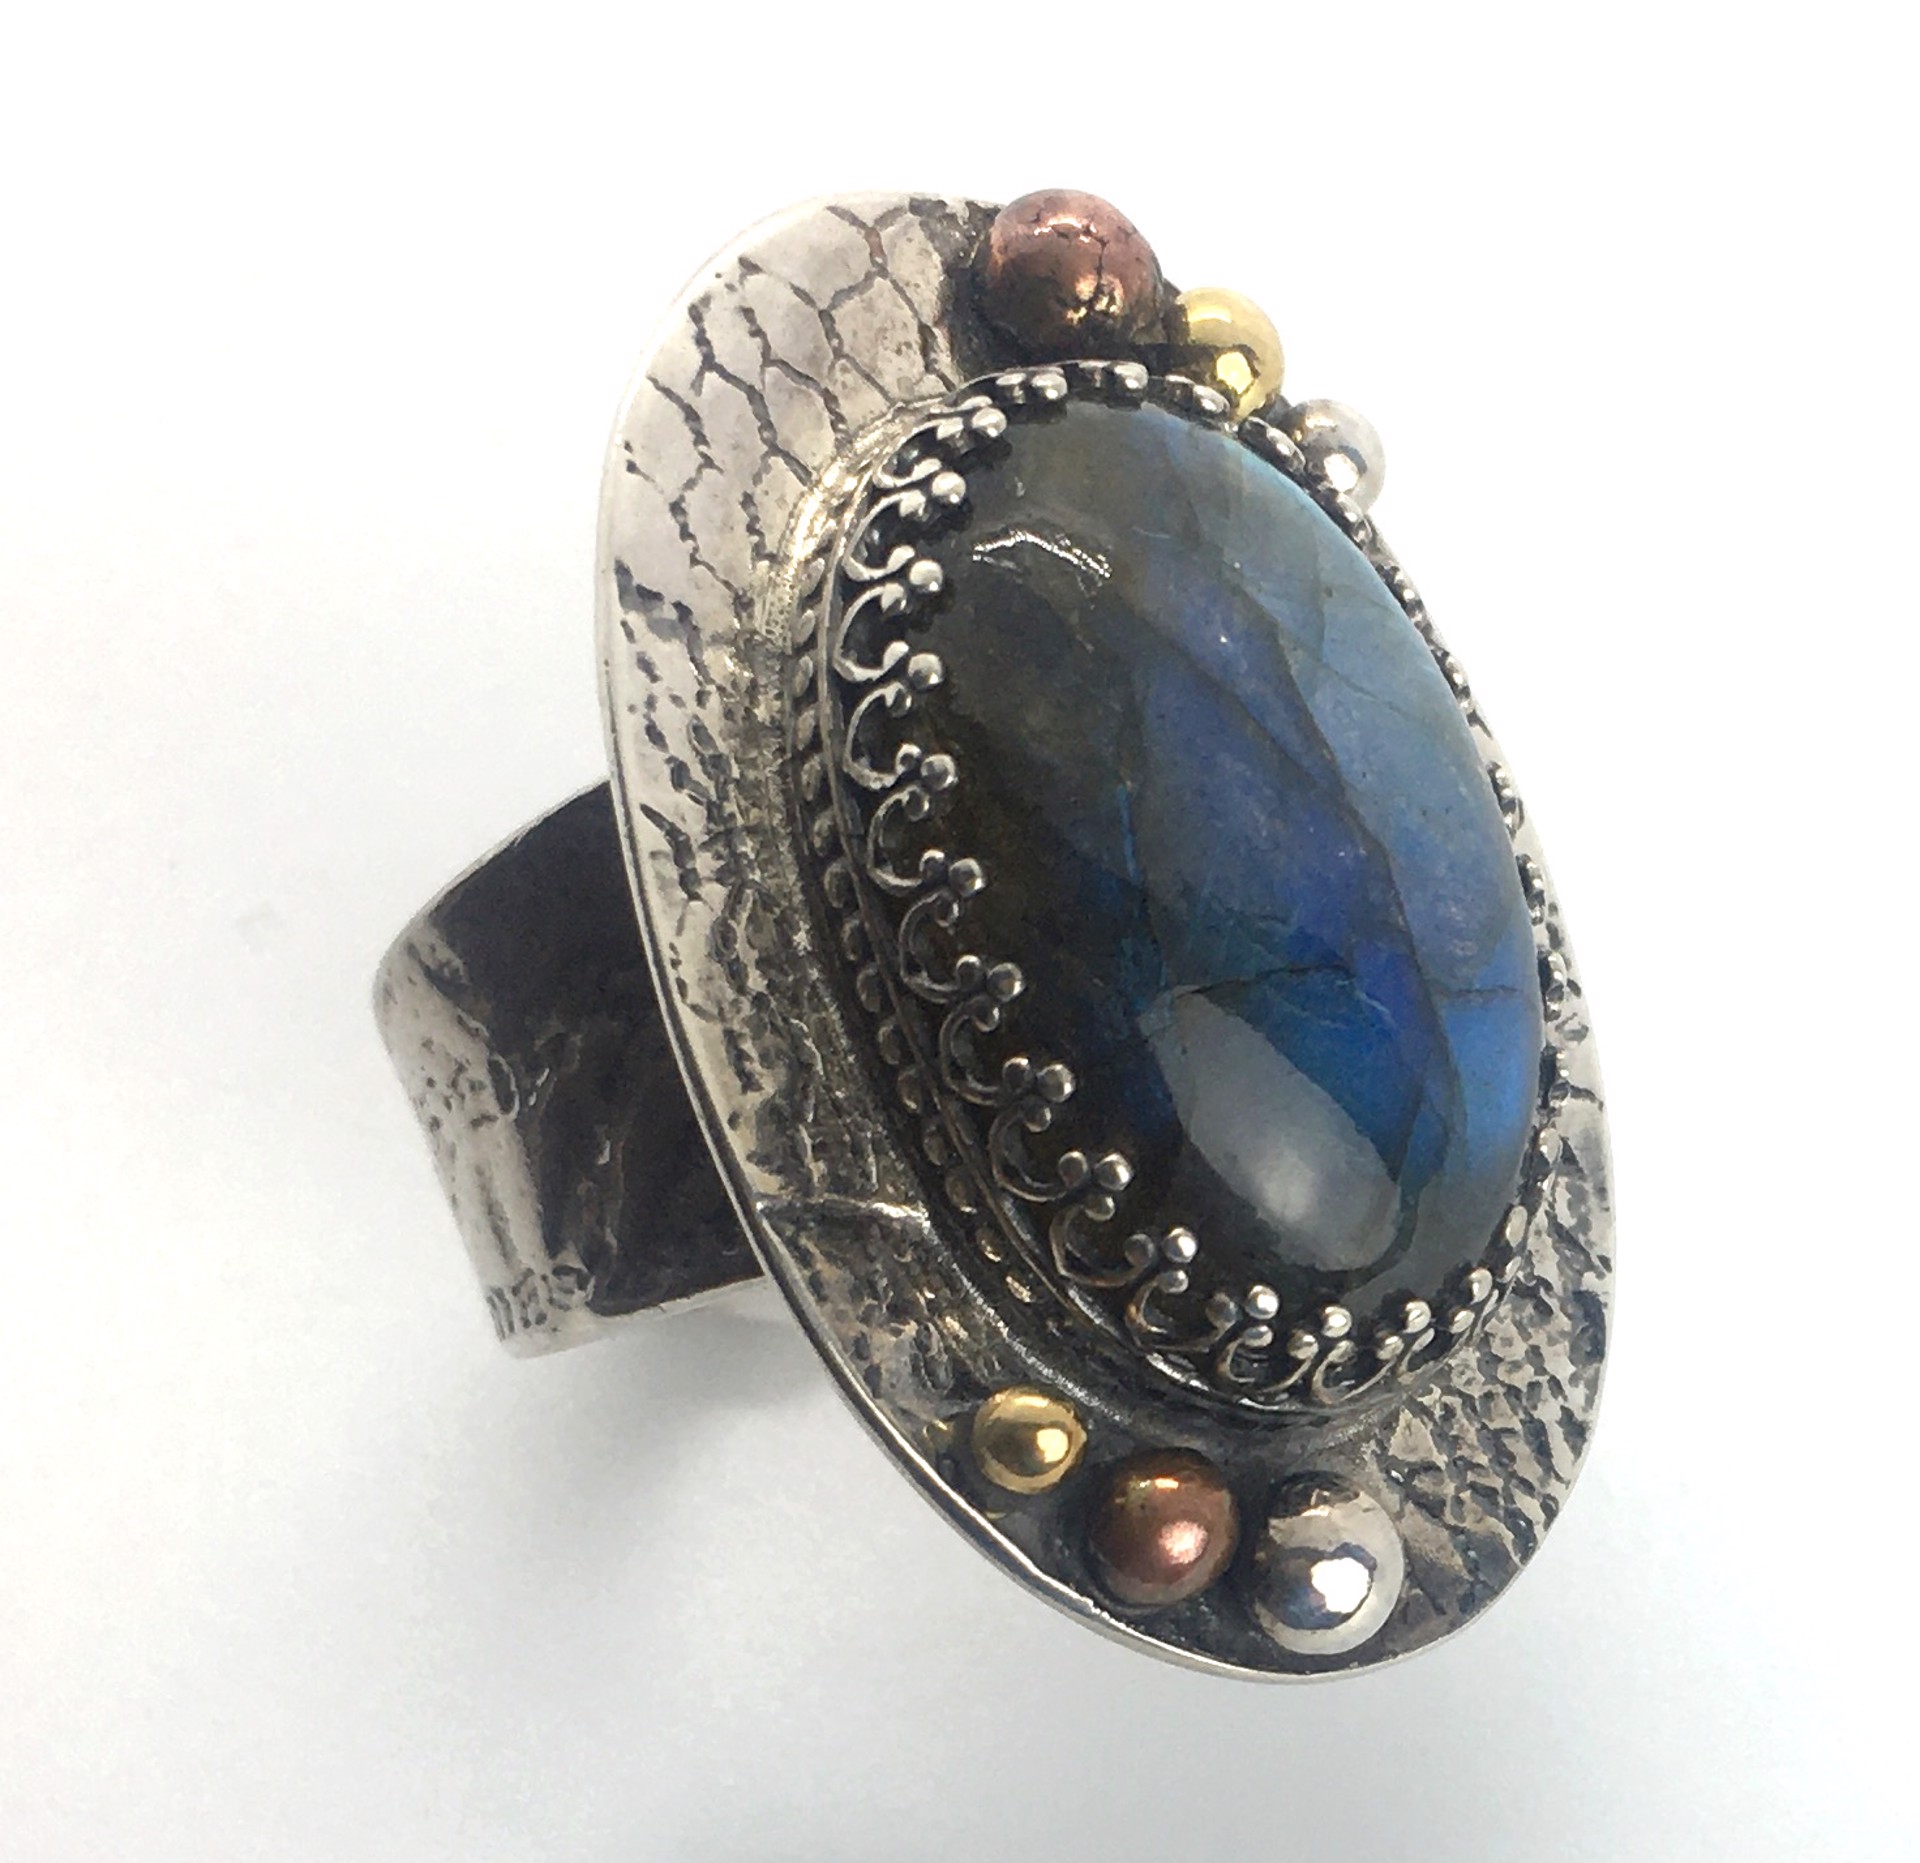 Labradorite Ring in Sterling Silver with 18K gold and Copper Accents by Sarah Foster